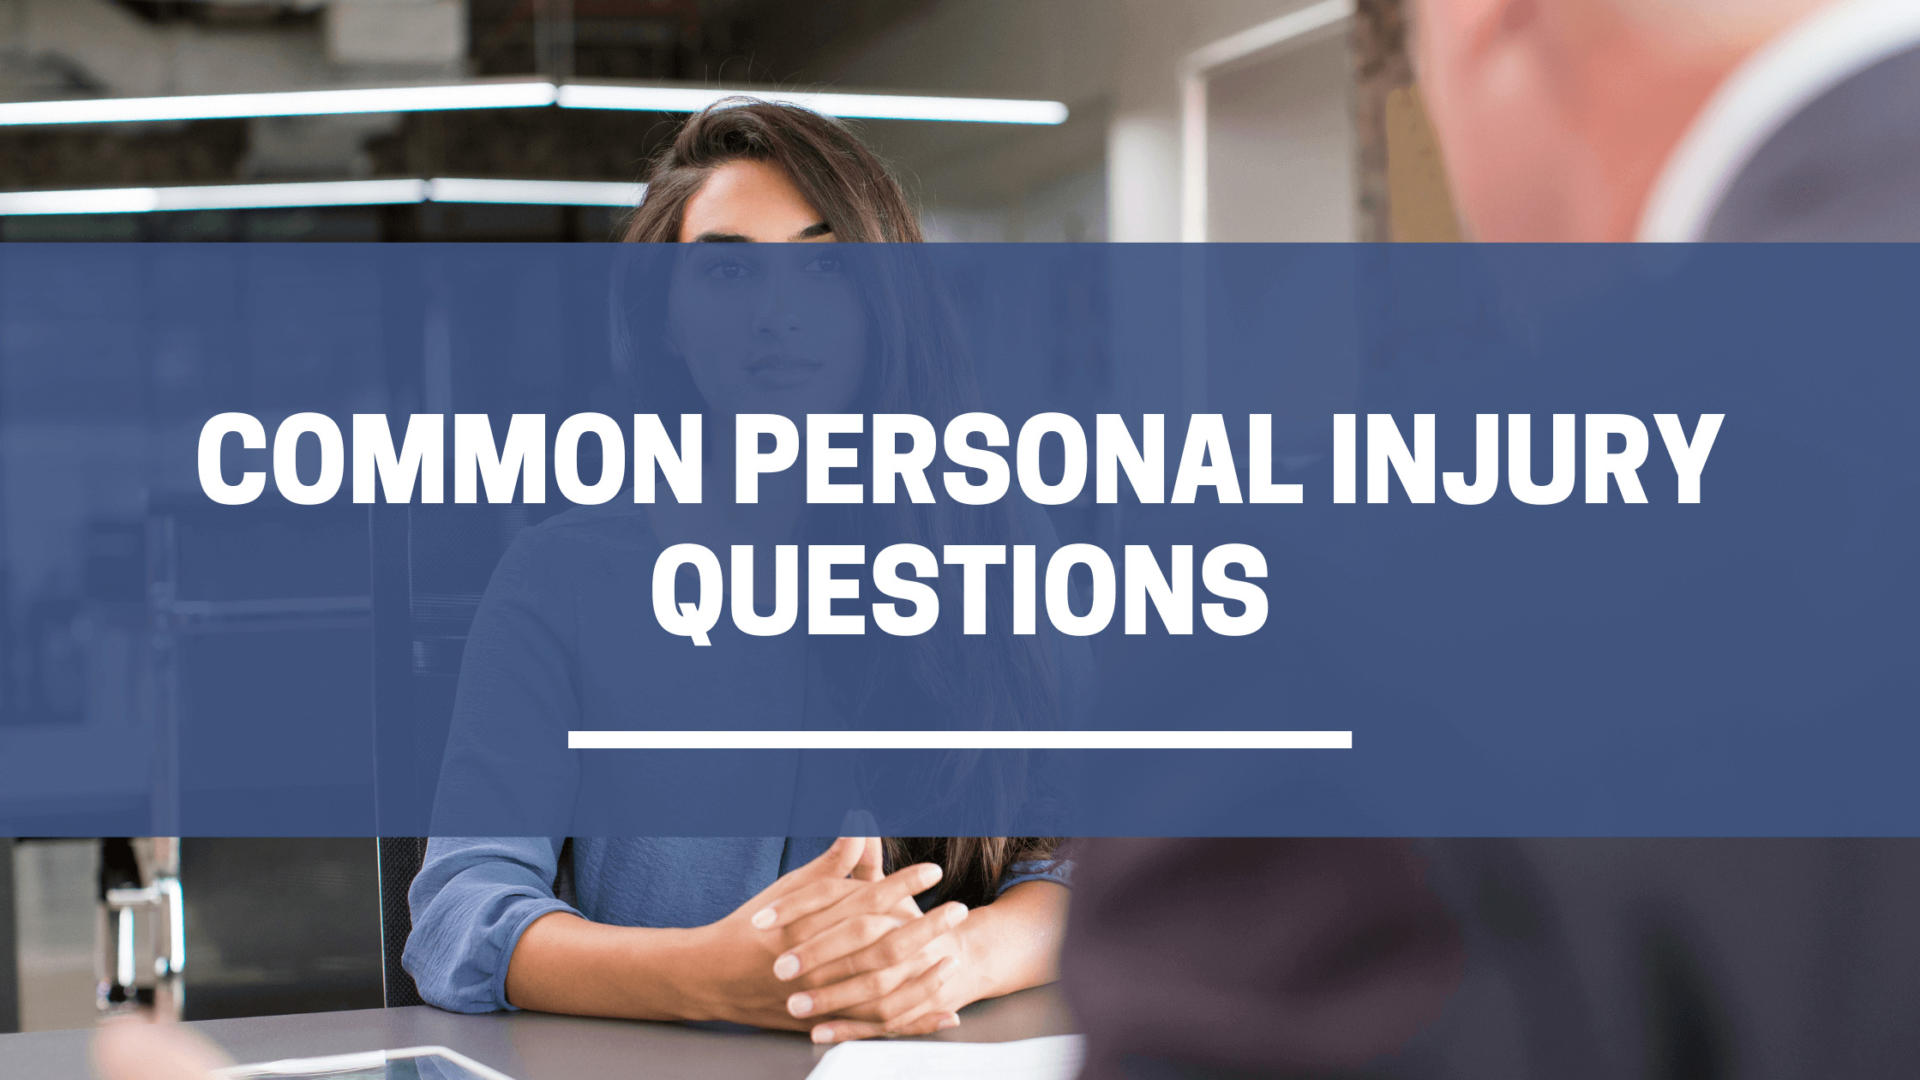 Common personal injury questions